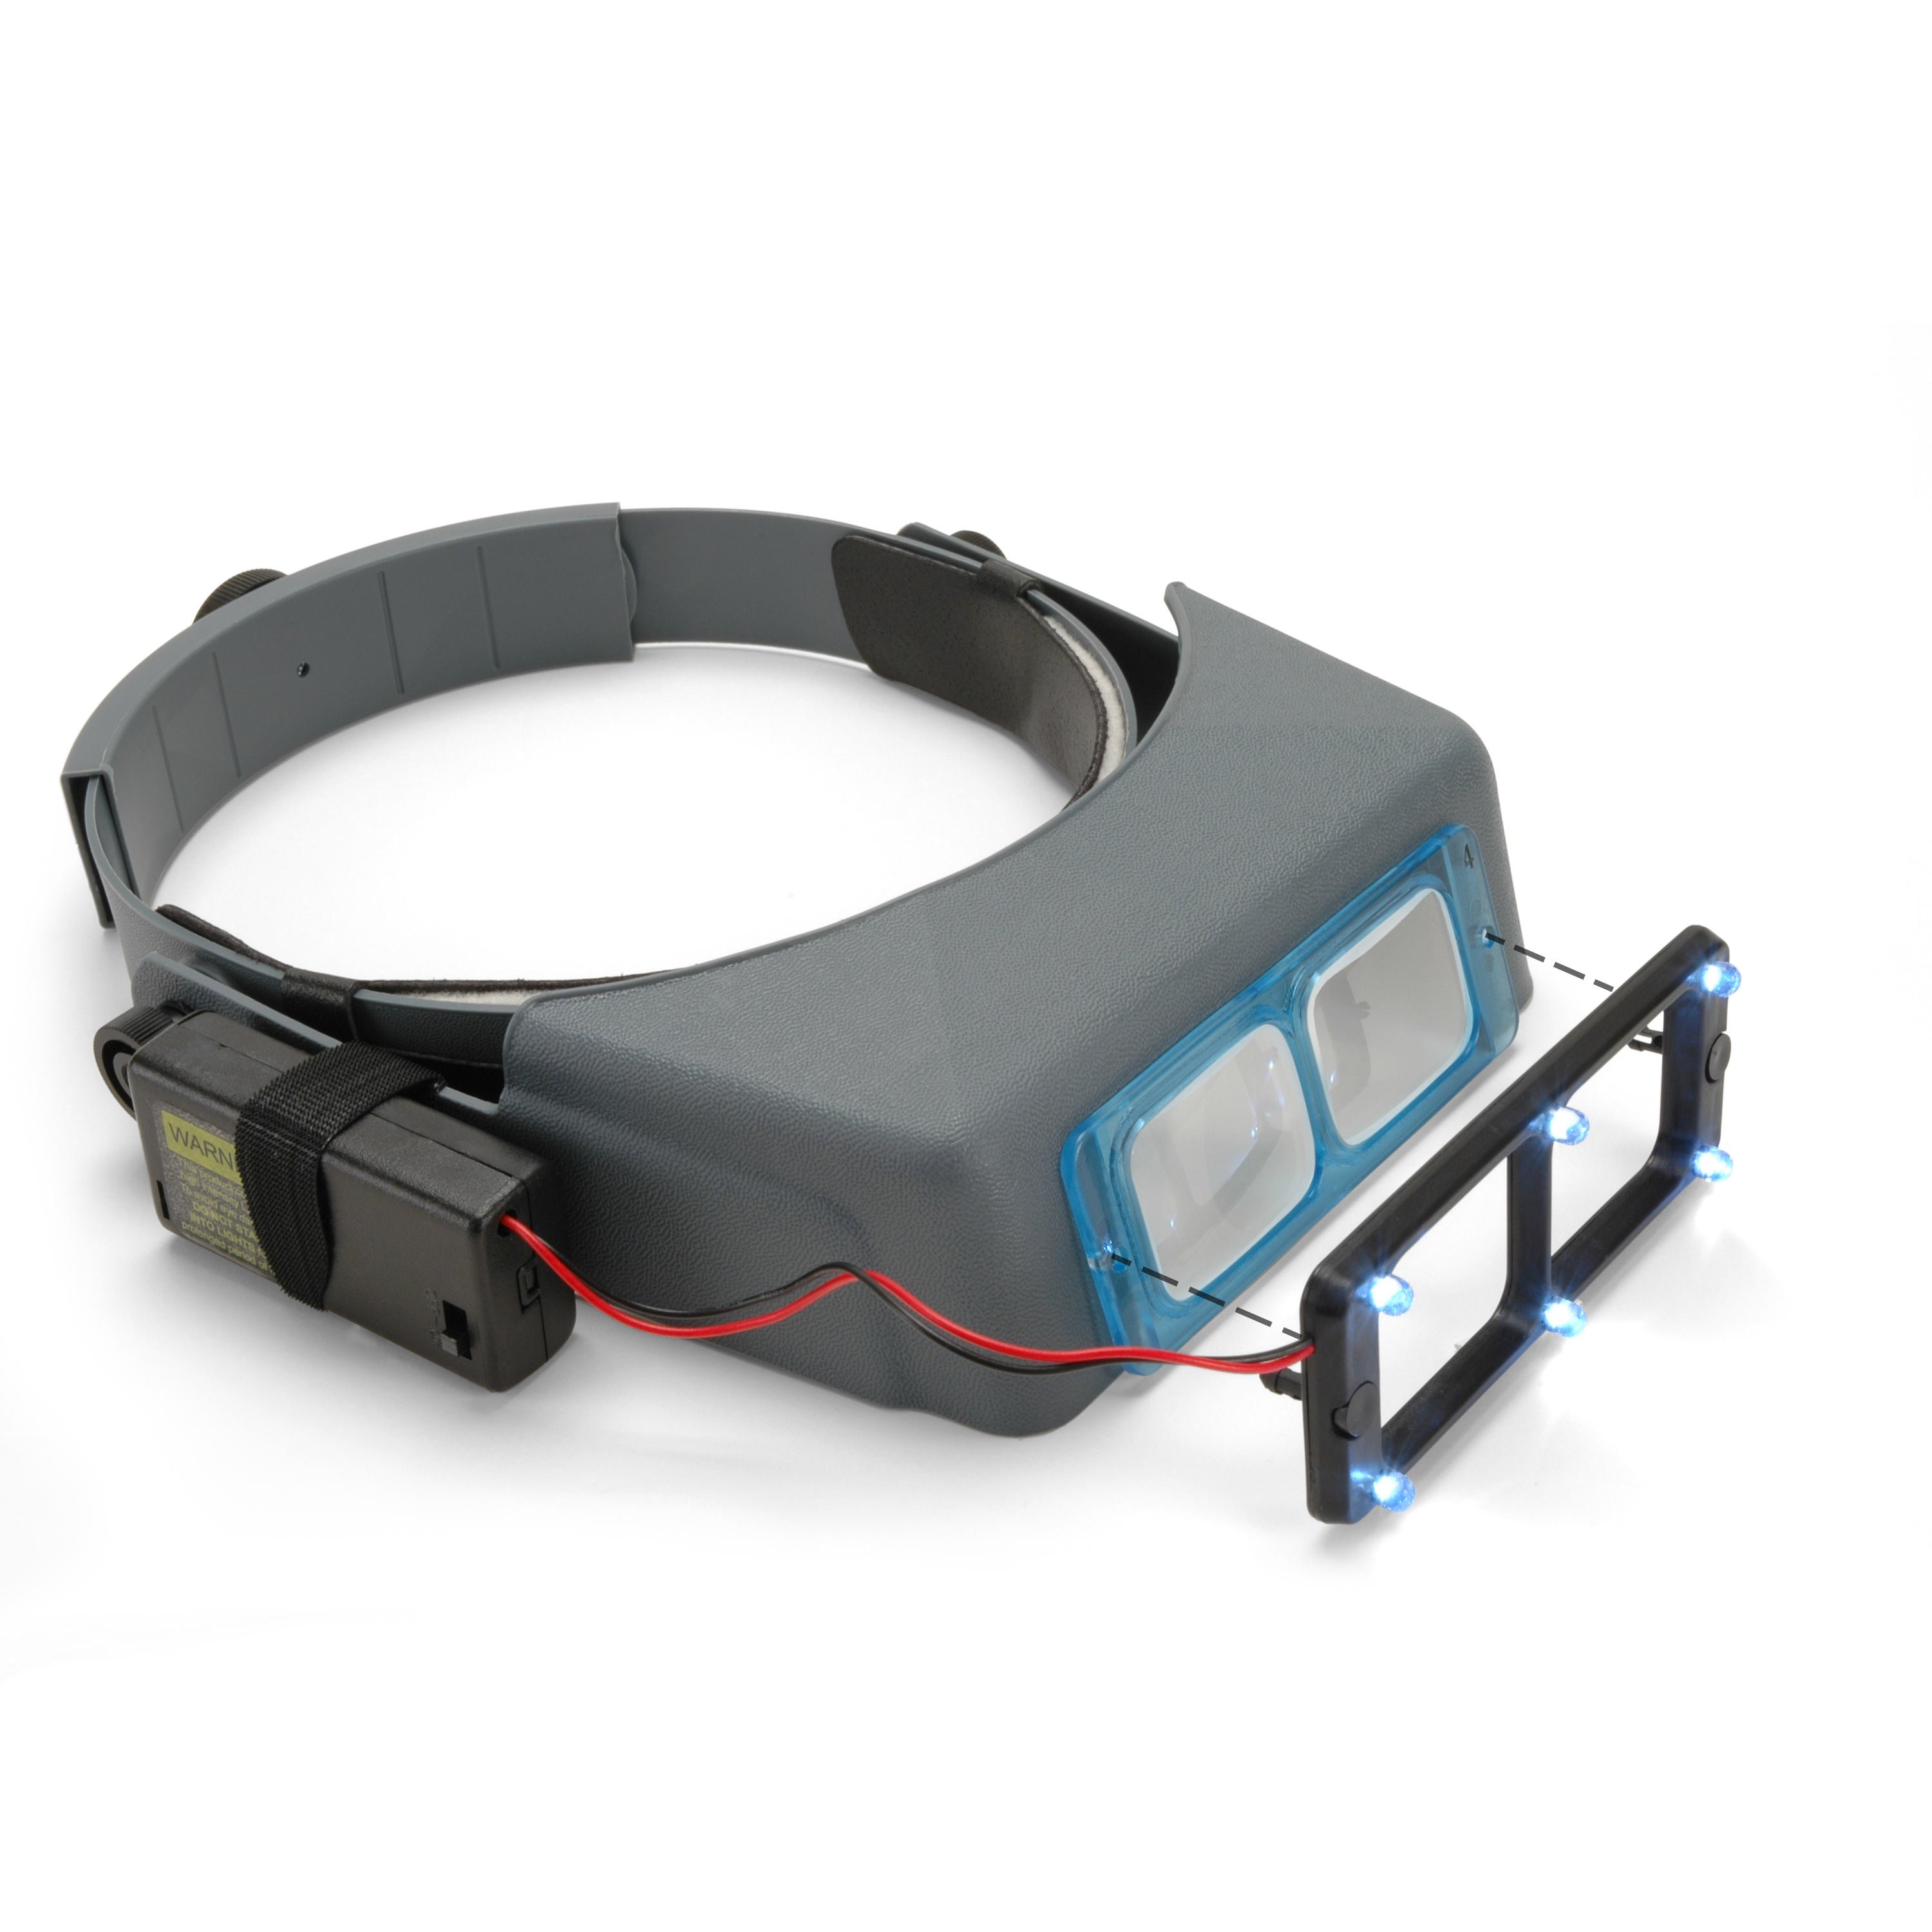 Optivisor Headband Magnifier, 1.5x Magnification Lens Only from StewMac.